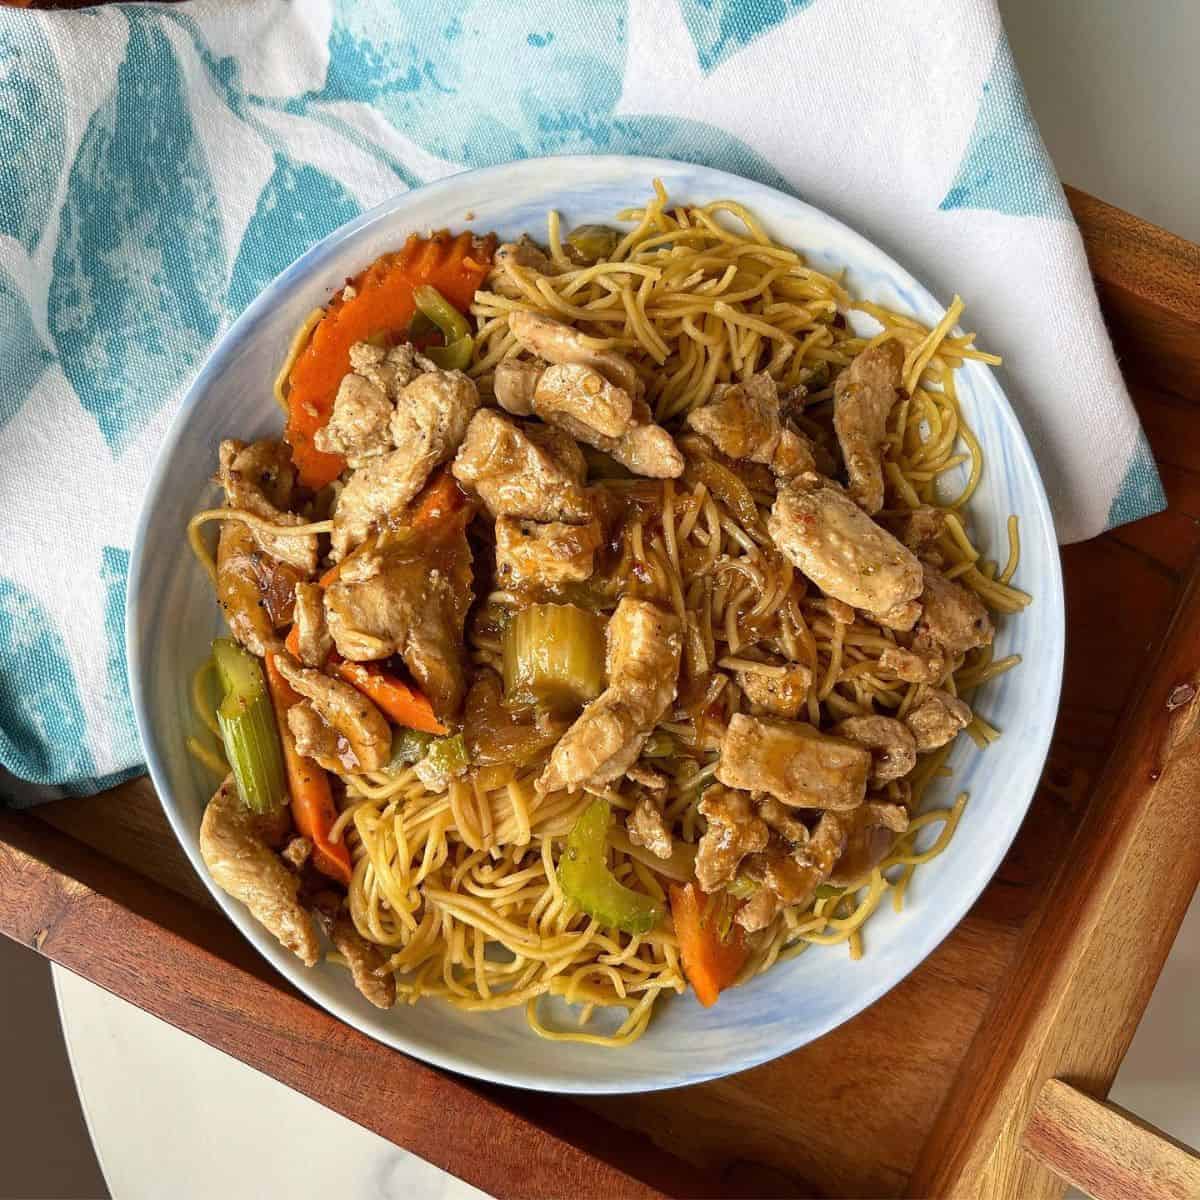 chicken in black bean sauce with noodles